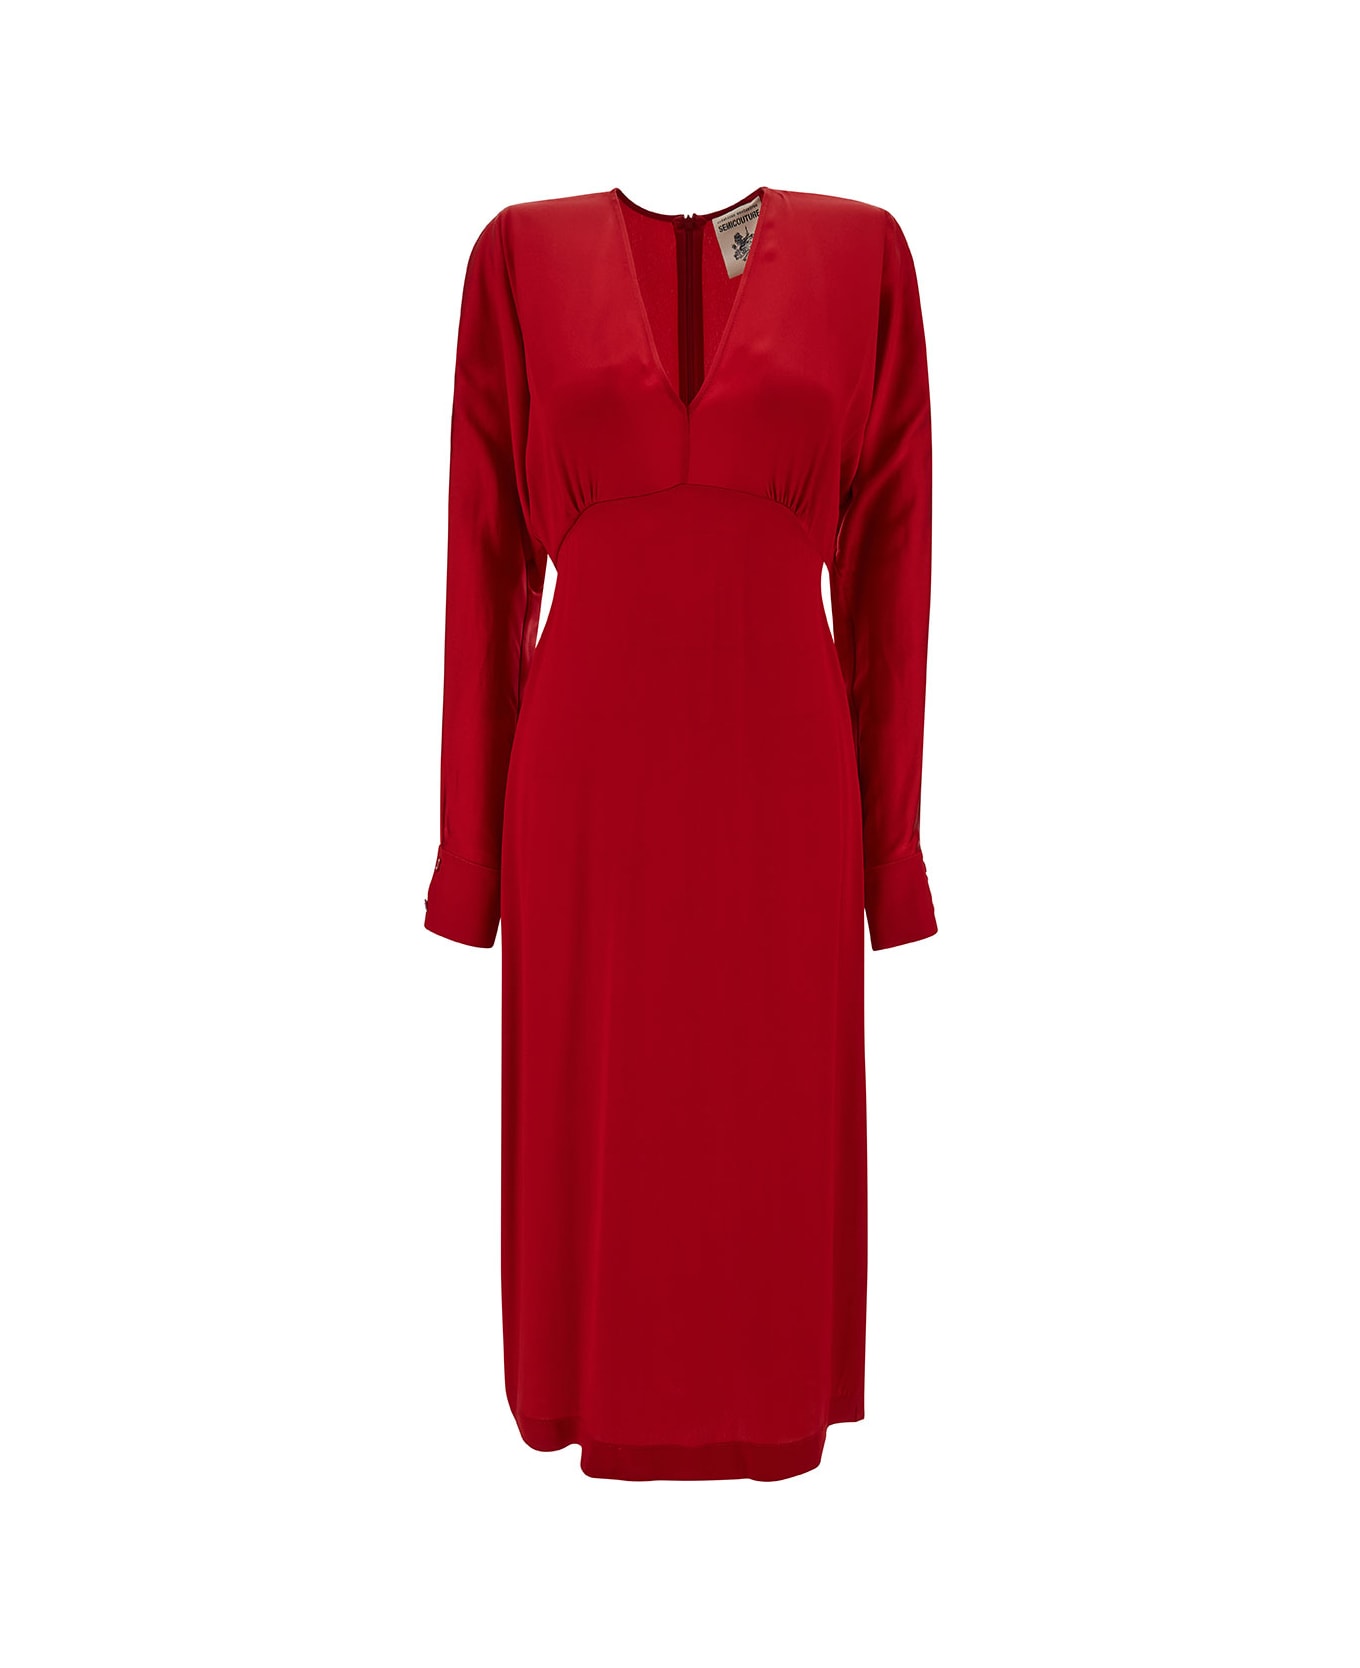 SEMICOUTURE Midi Red V Neck Dress With Long Sleeve In Acetate And Silk Blend Woman - Red